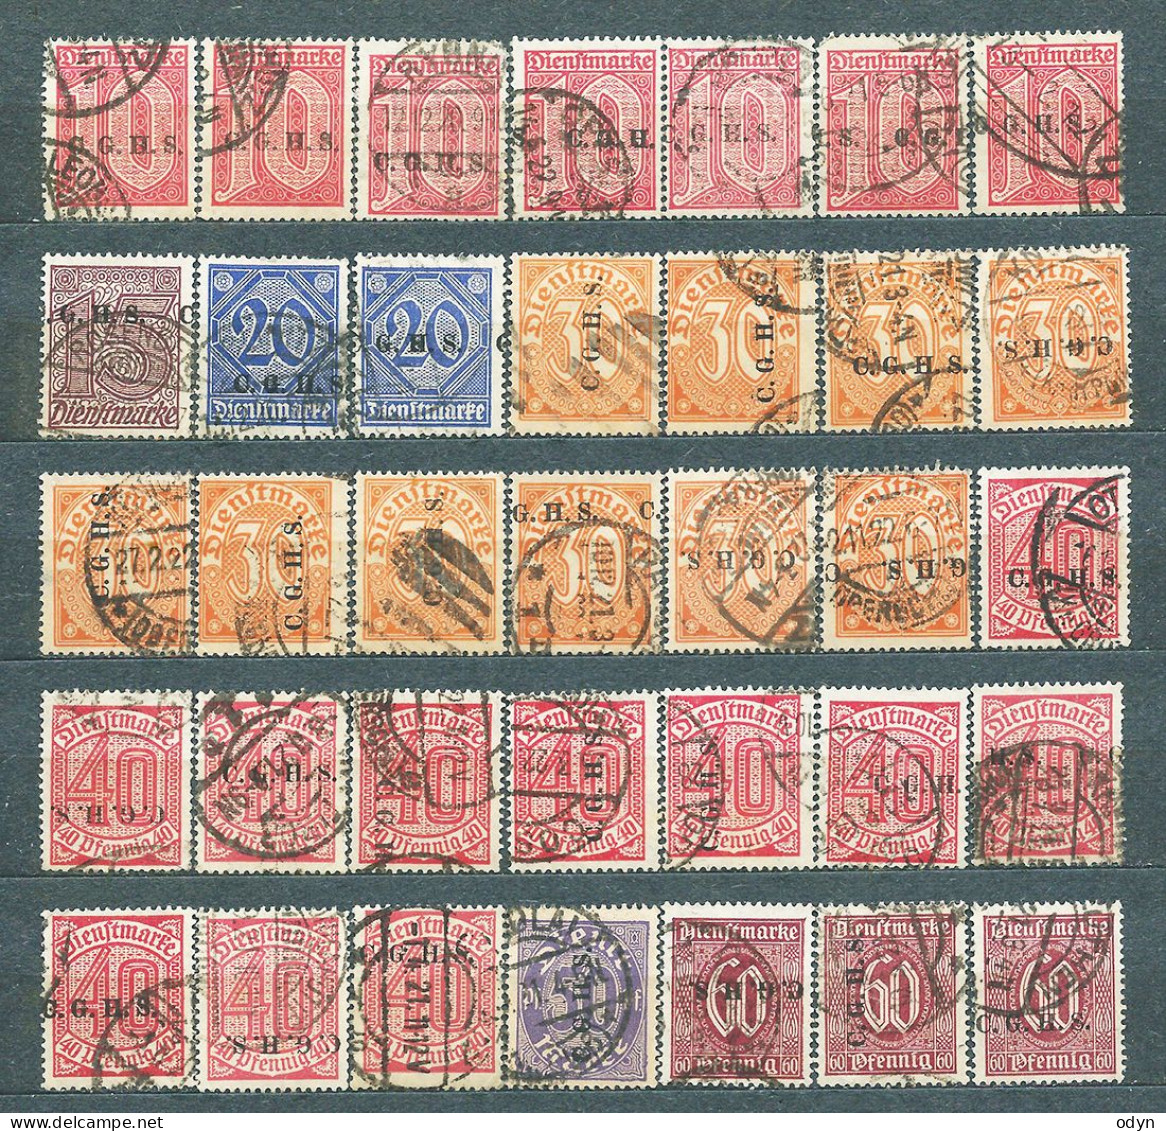 Upper Silesia, 1920, Officials, 82 Stamps From Set MiNr 8-20 (incl. 4 Stamps #18 Wz. 1) - Overprint C.G.H.S. - Used - Slesia